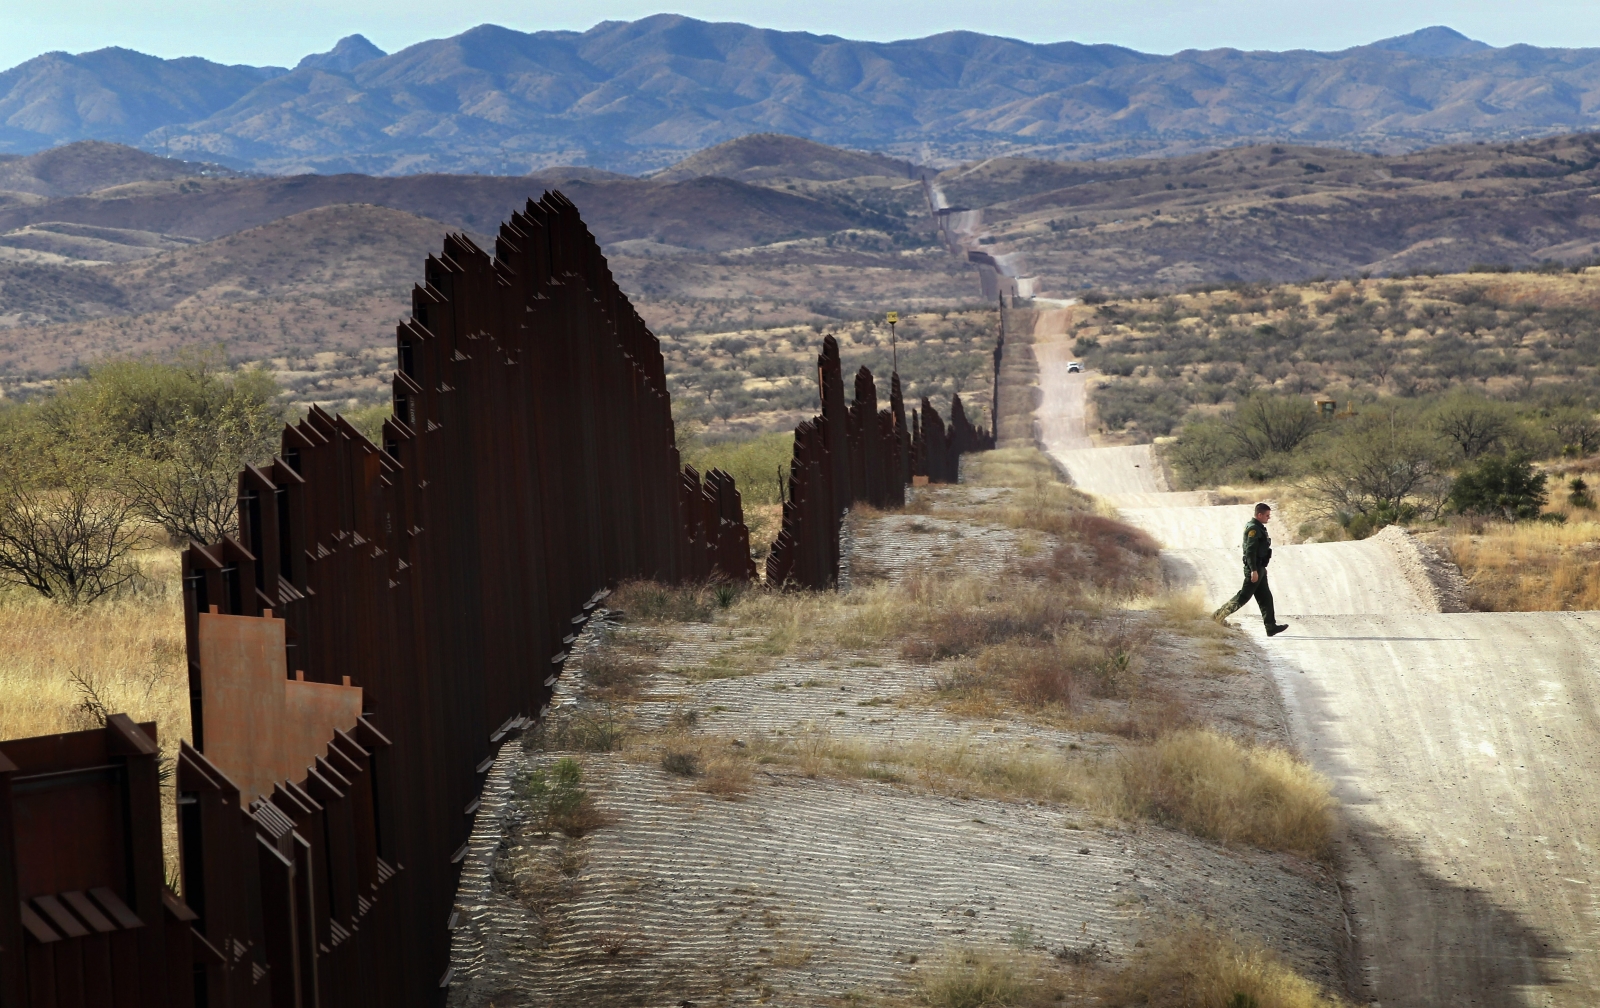 A US police officer patrols the US-Mexican border in Arizona. (Getty)